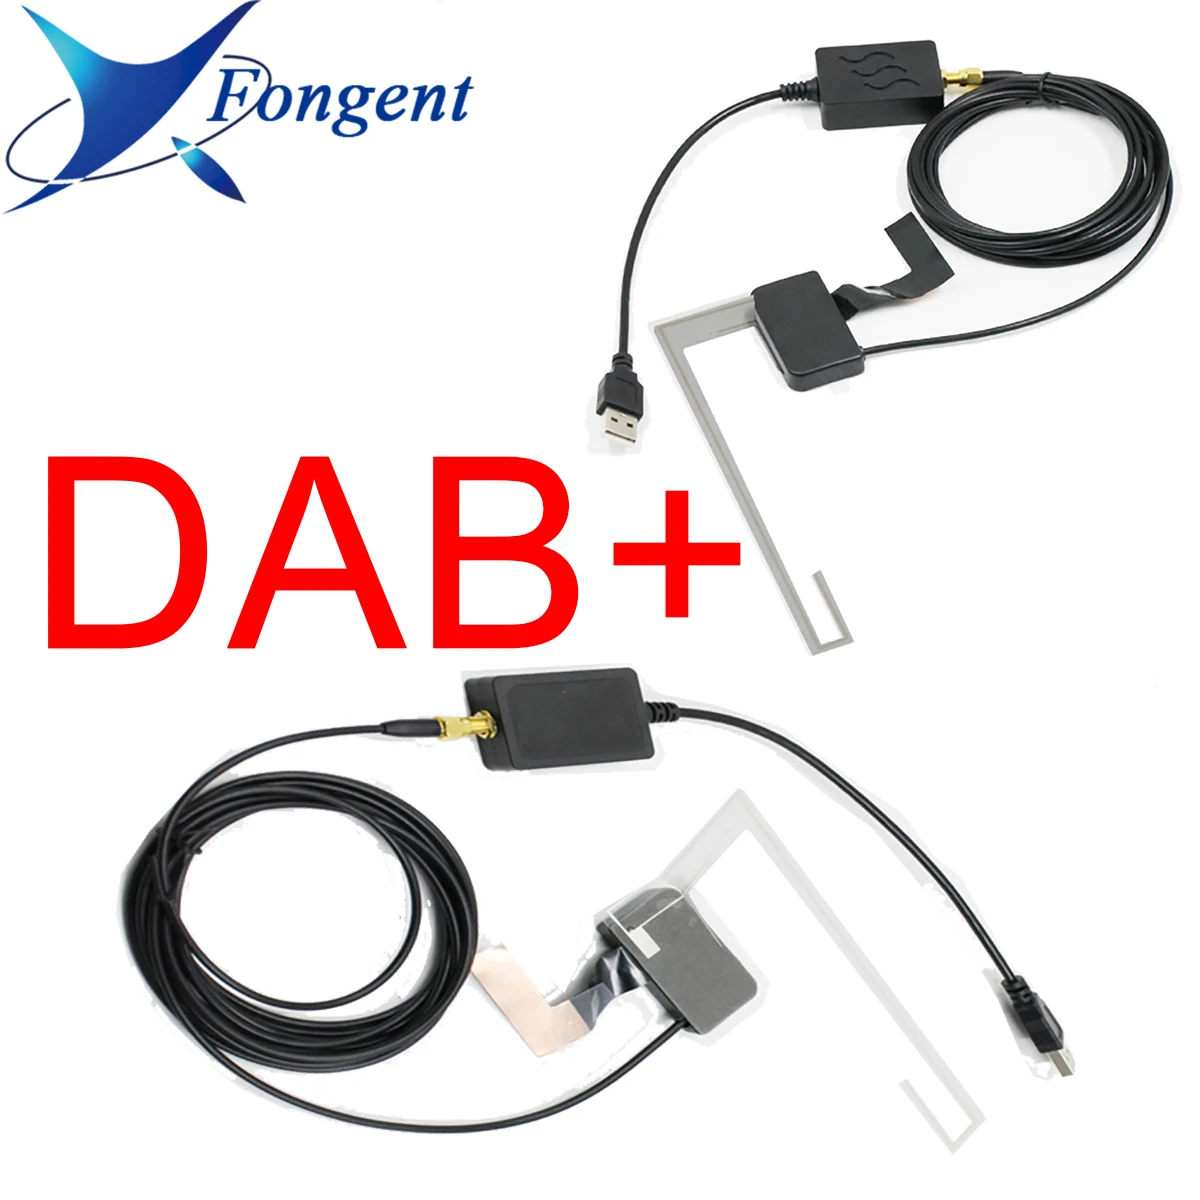 

External DAB DAB+ Radio Antenna for Android Car DVD GPS Unit Multimedia Player